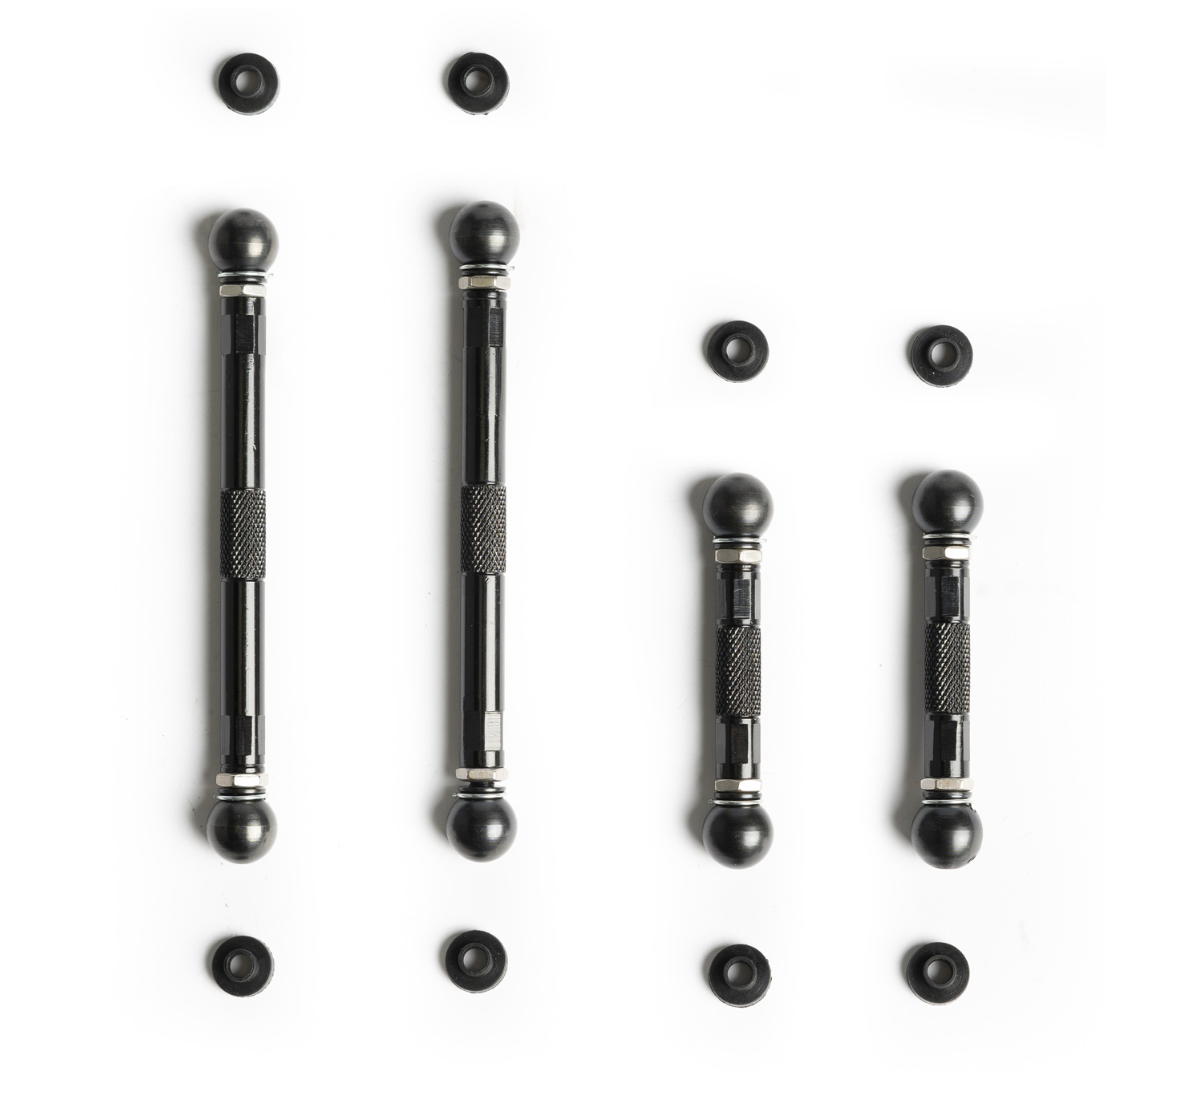 CTS Turbo Adjustable Lowering Links - Audi C8 A6/A7/S6/S7/RS6/RS7 With Air Suspension